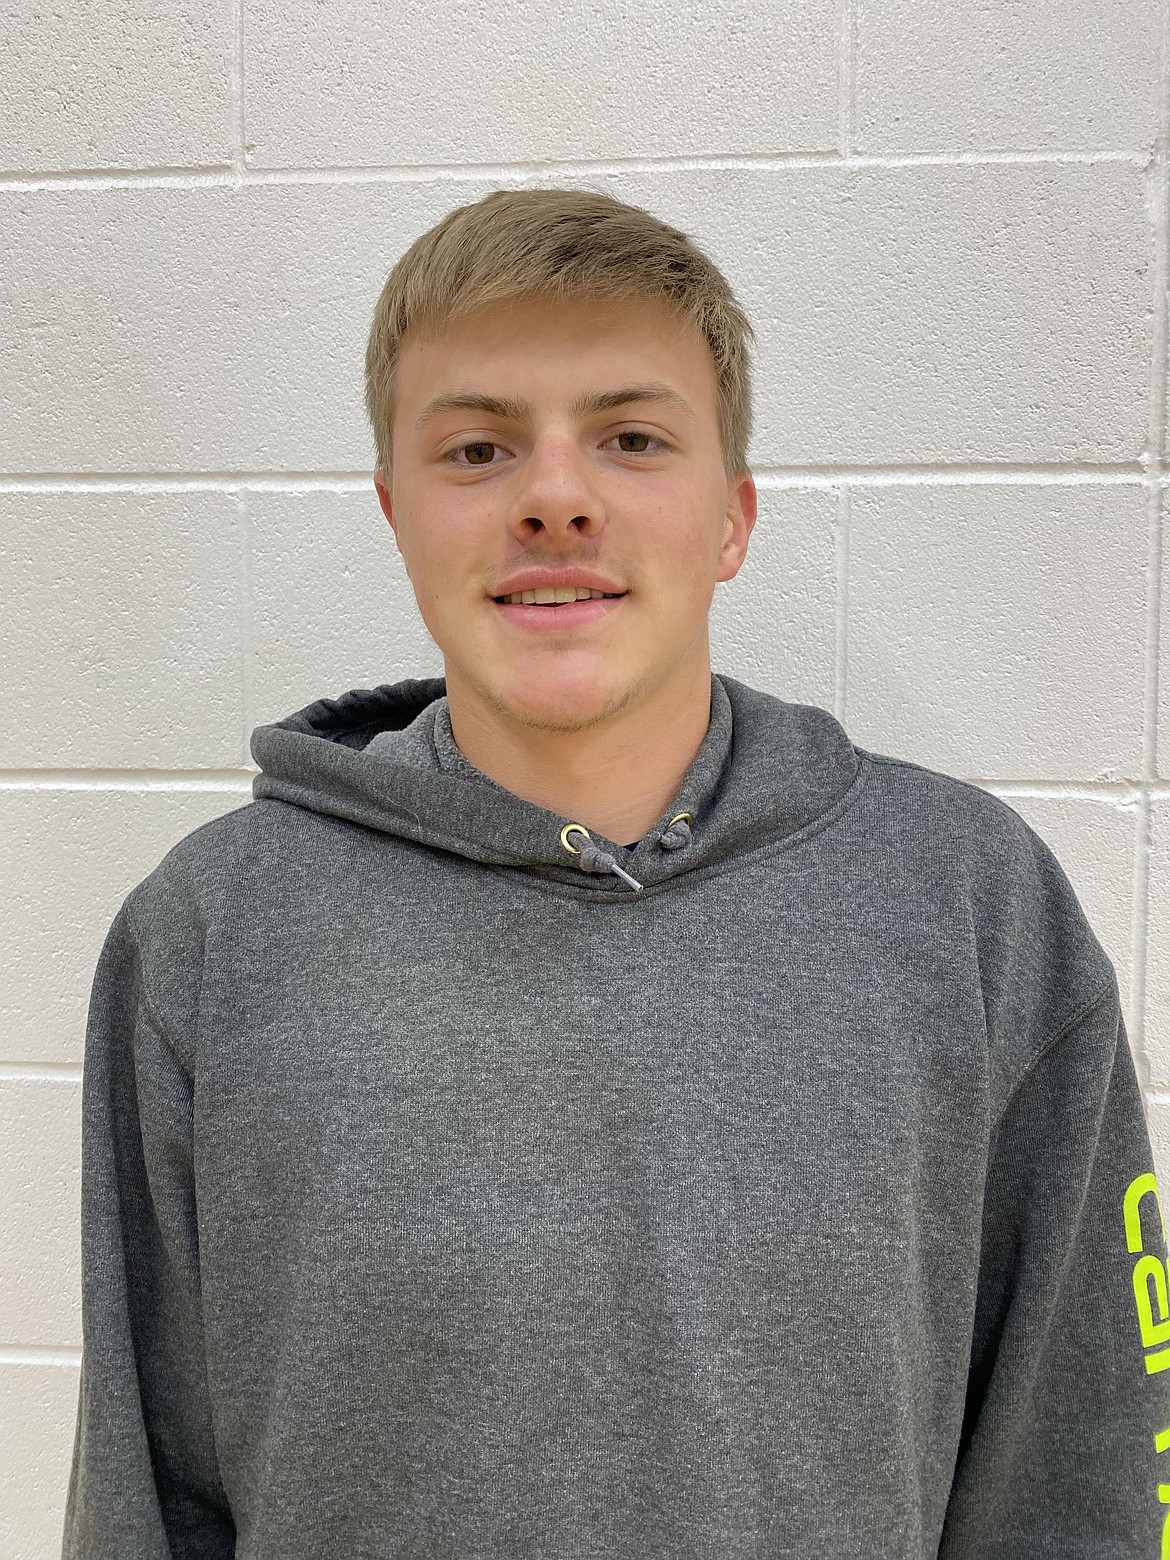 Courtesy photo
Junior Chase Berg is this week's Post Falls High School Athlete of the Week. Berg won the 200-meter dash and the triple jump, and was on the winning 4x200 and 4-400 relays at the 5A Region 1 track and field meet.